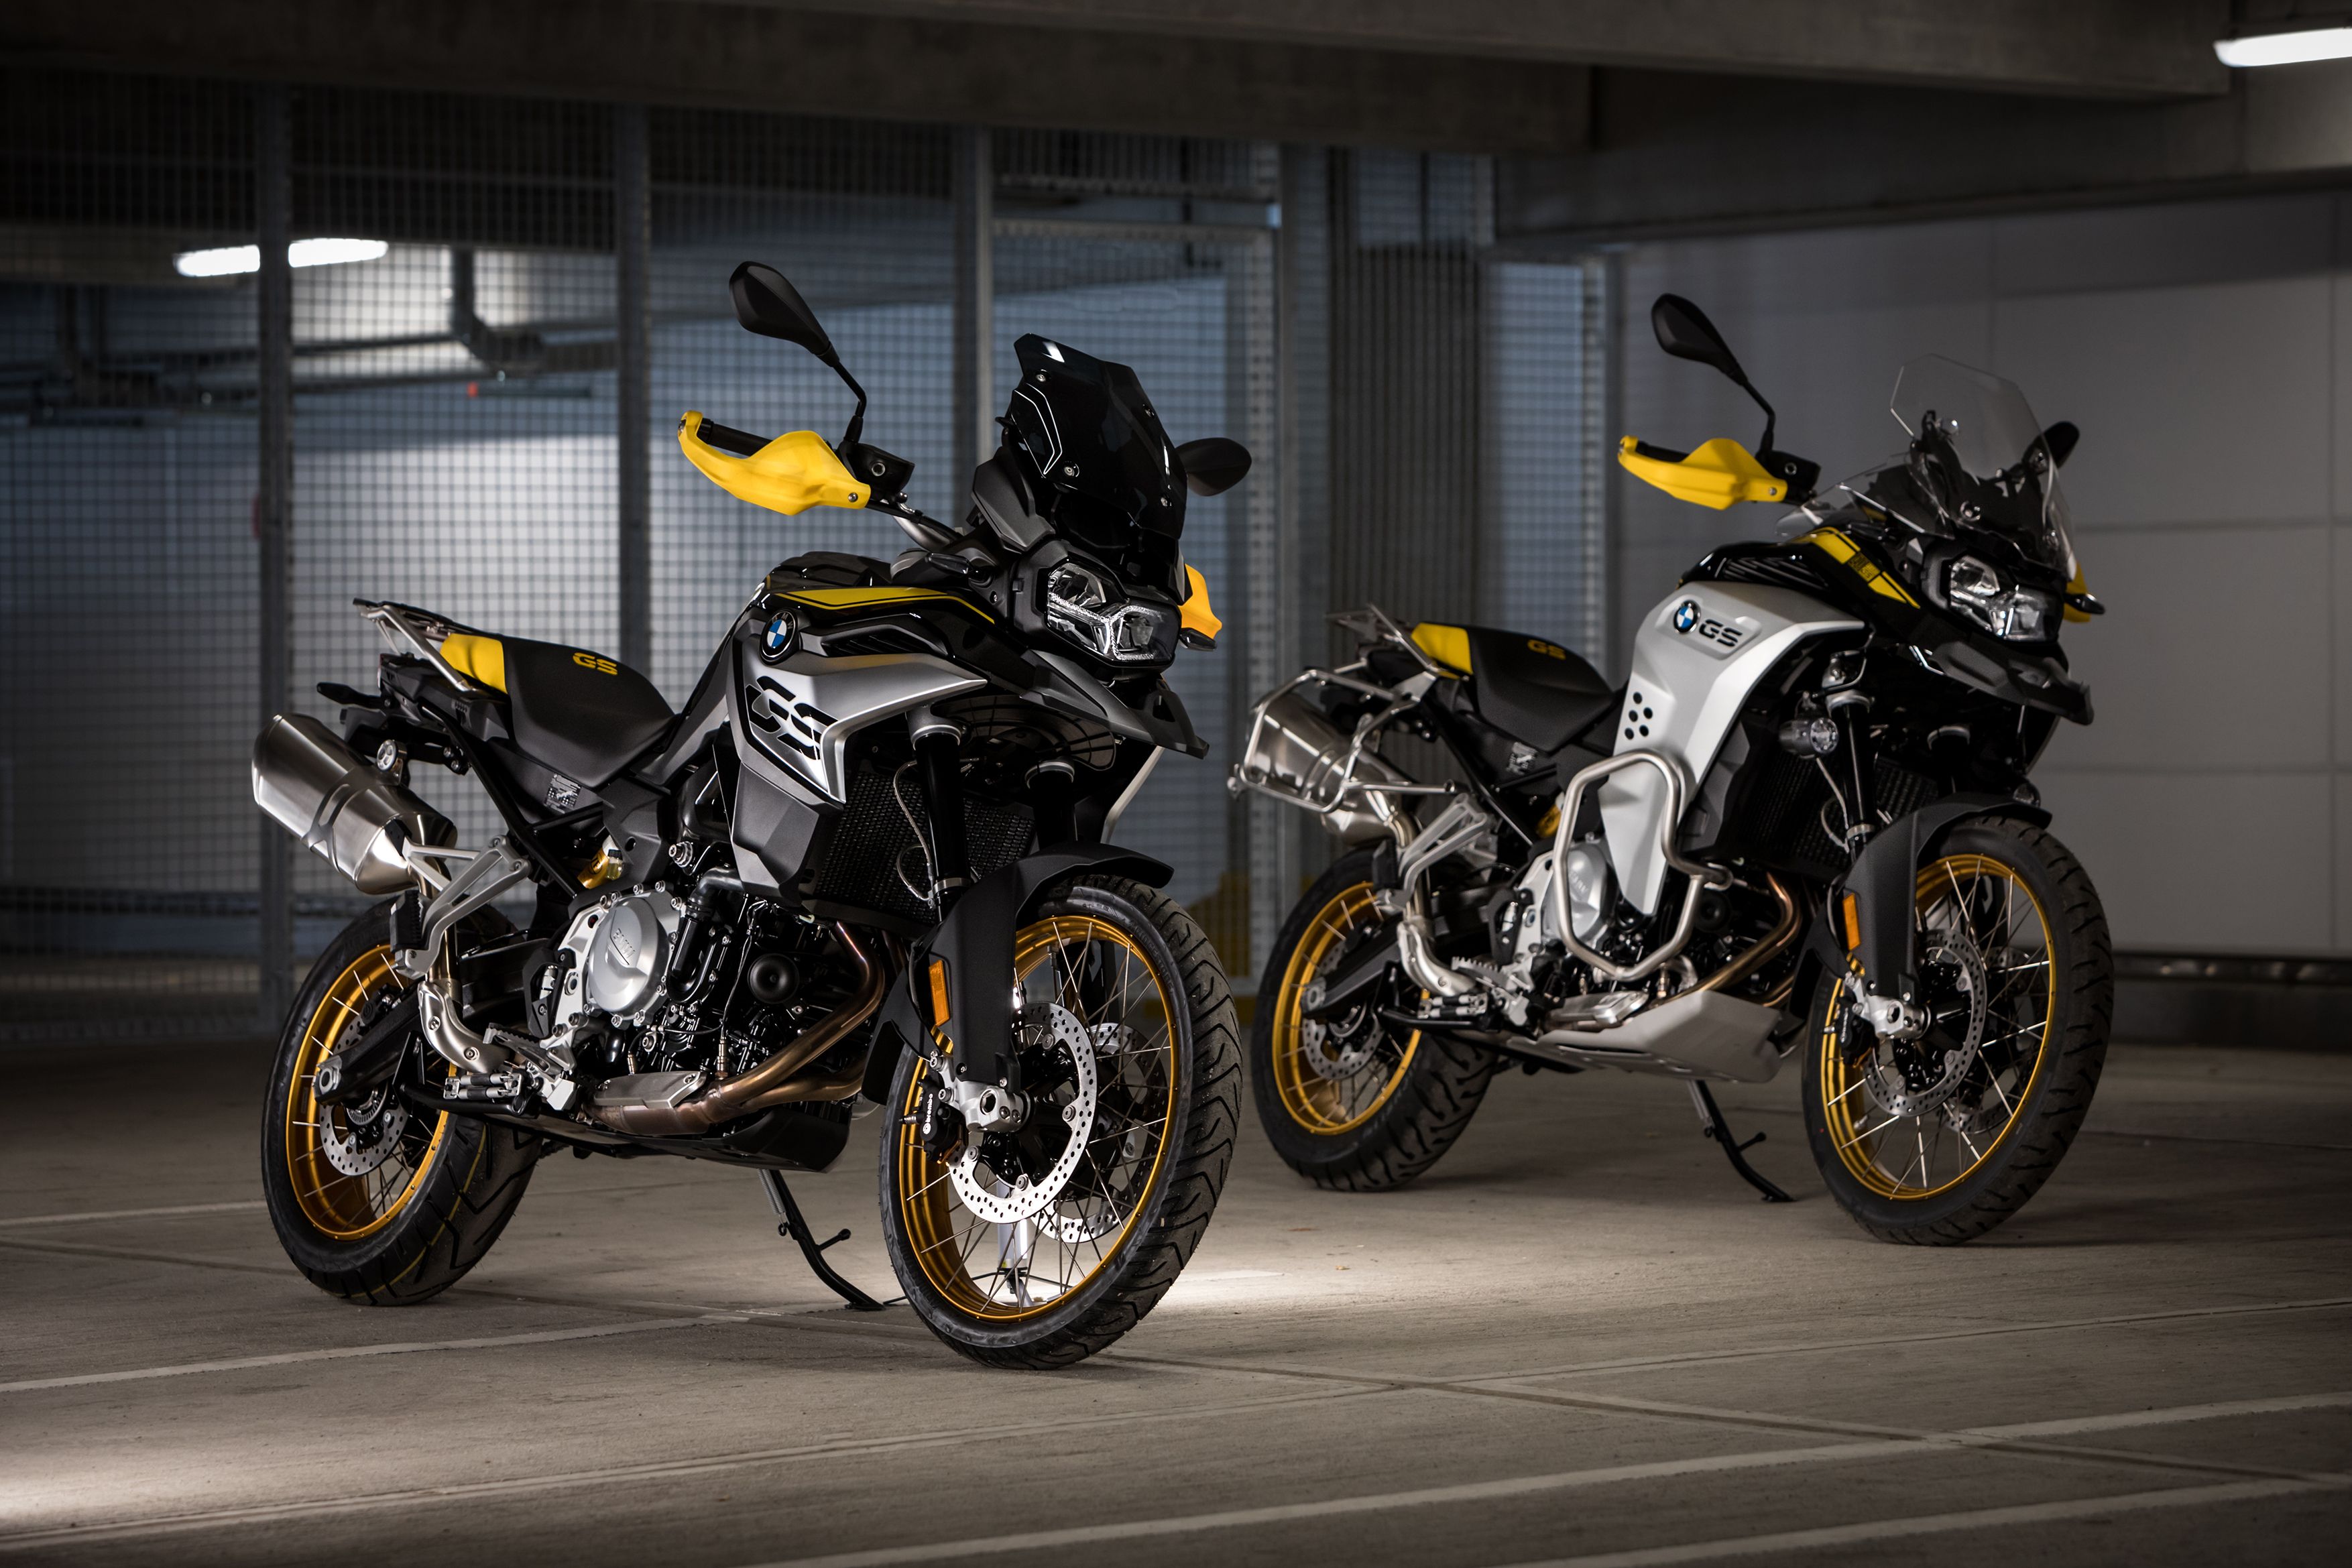 BMW F 850 GS Wallpaper 4K, 40 Years of GS Edition, Bikes